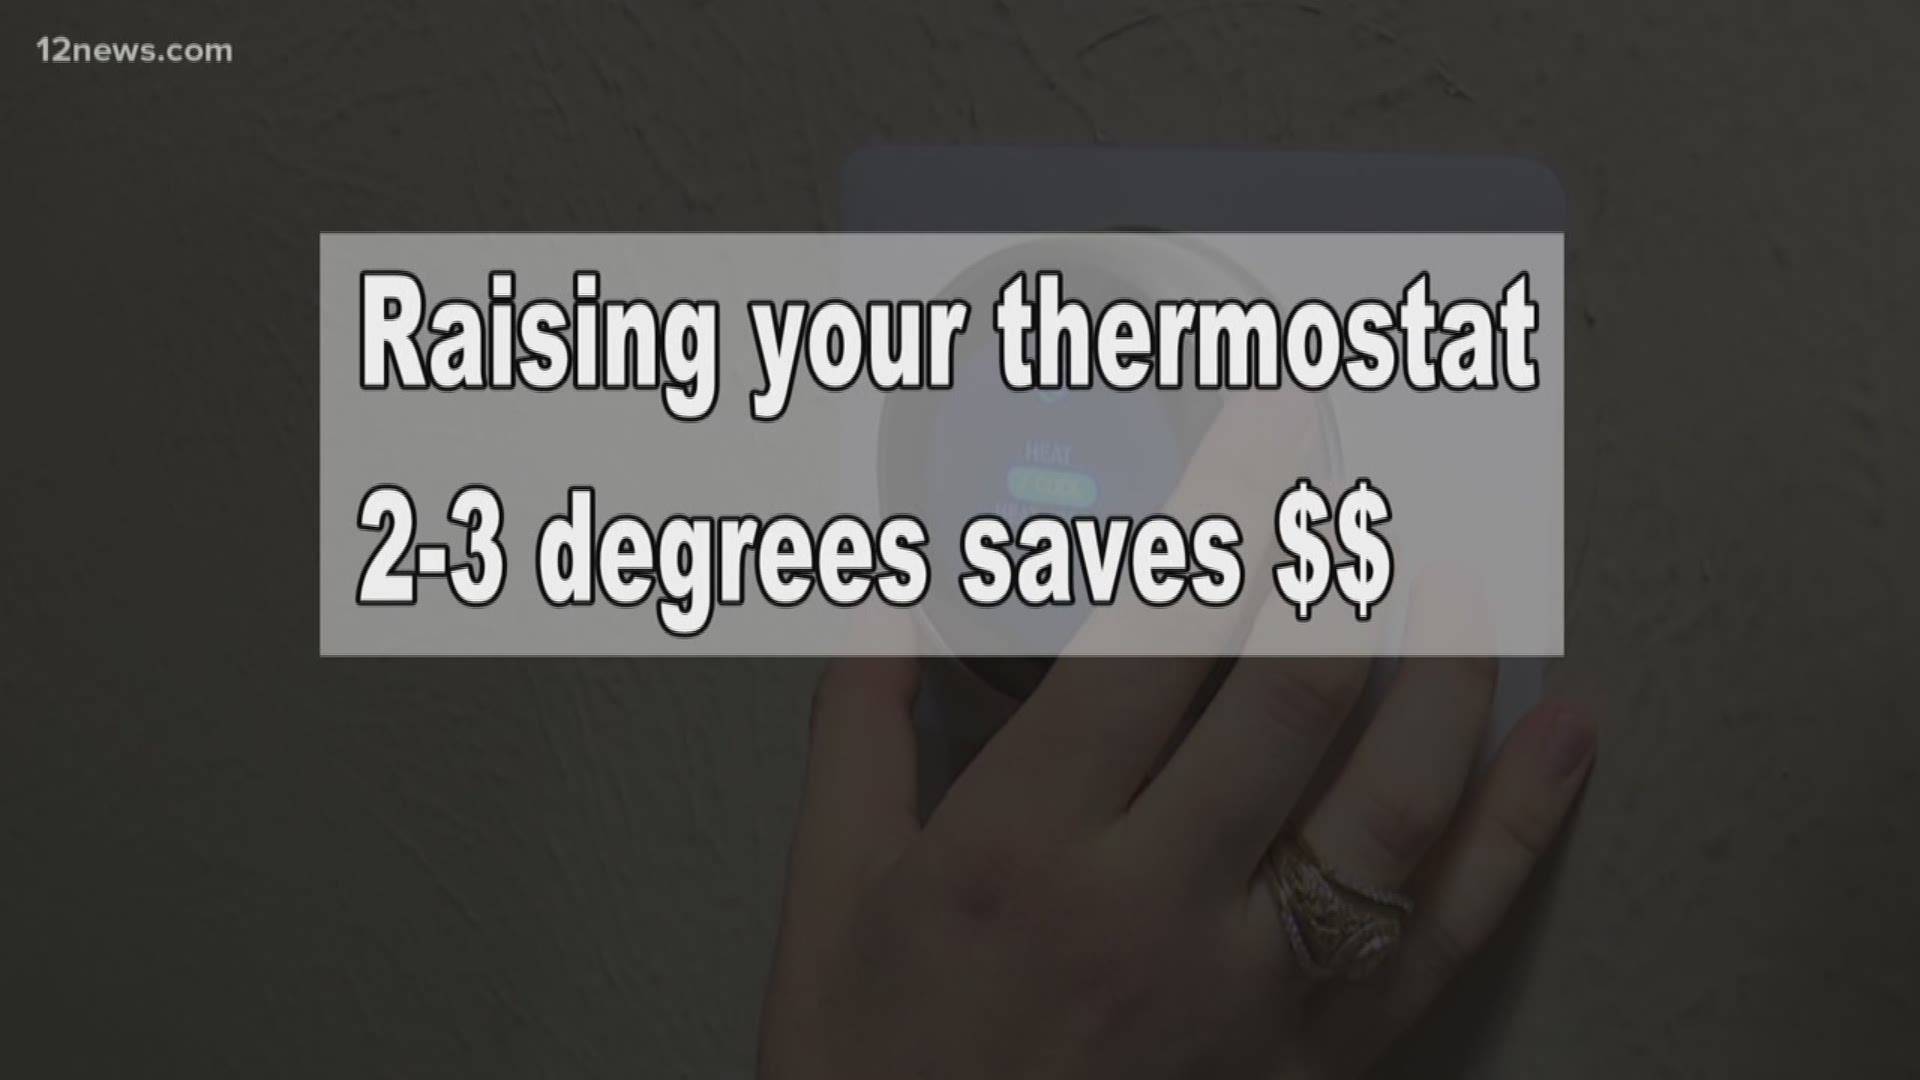 Do a few degrees really matter in temperature control when your bill comes at the end of the month? The answer is YES.